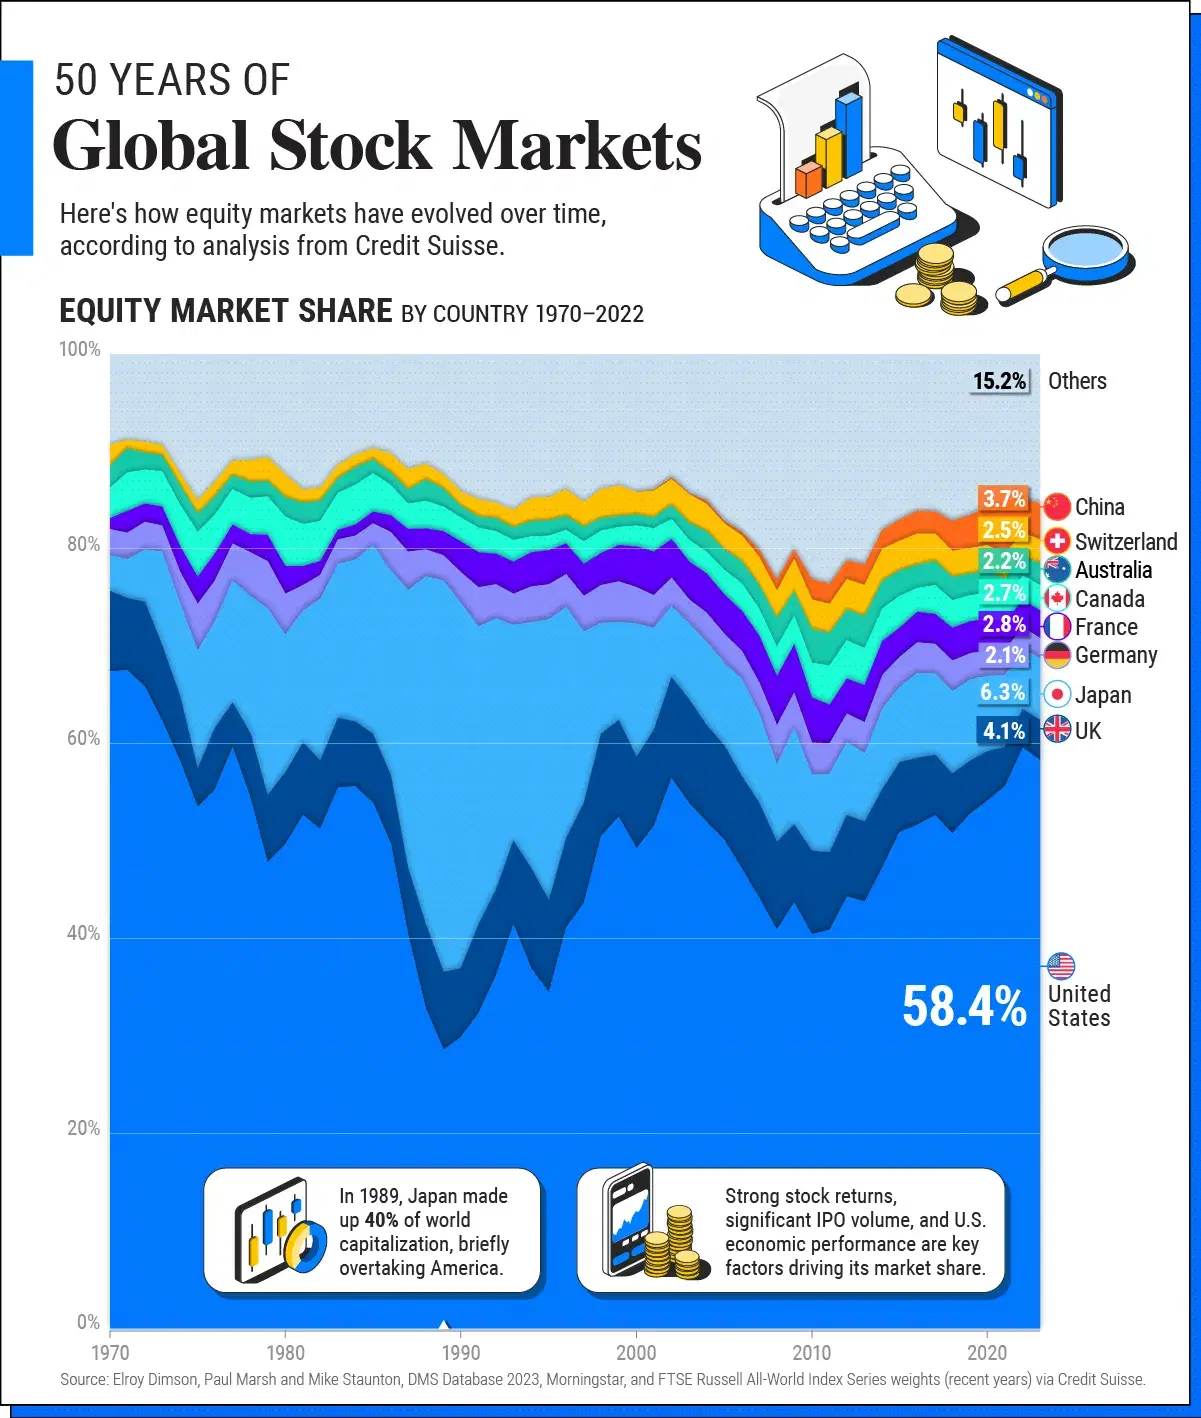 The Largest Stock Markets Over Time, by Country (1970-Today)